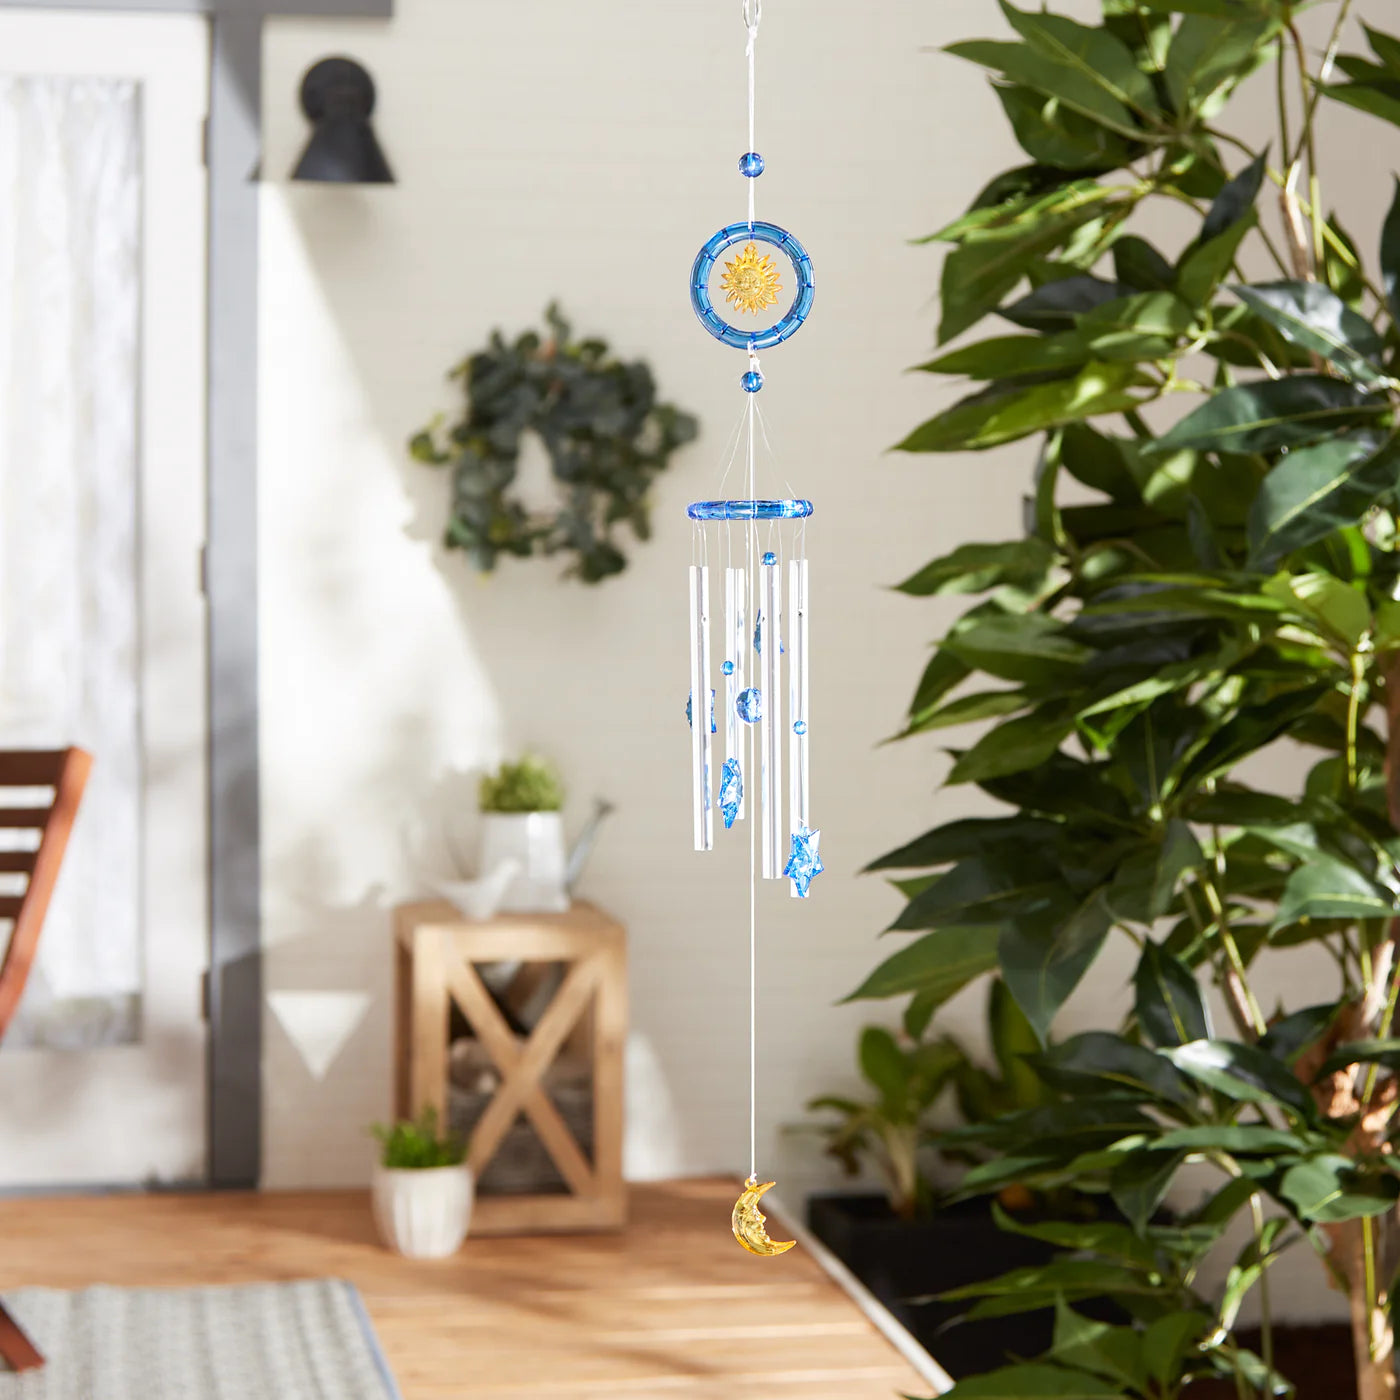 Celestial Wind Chimes